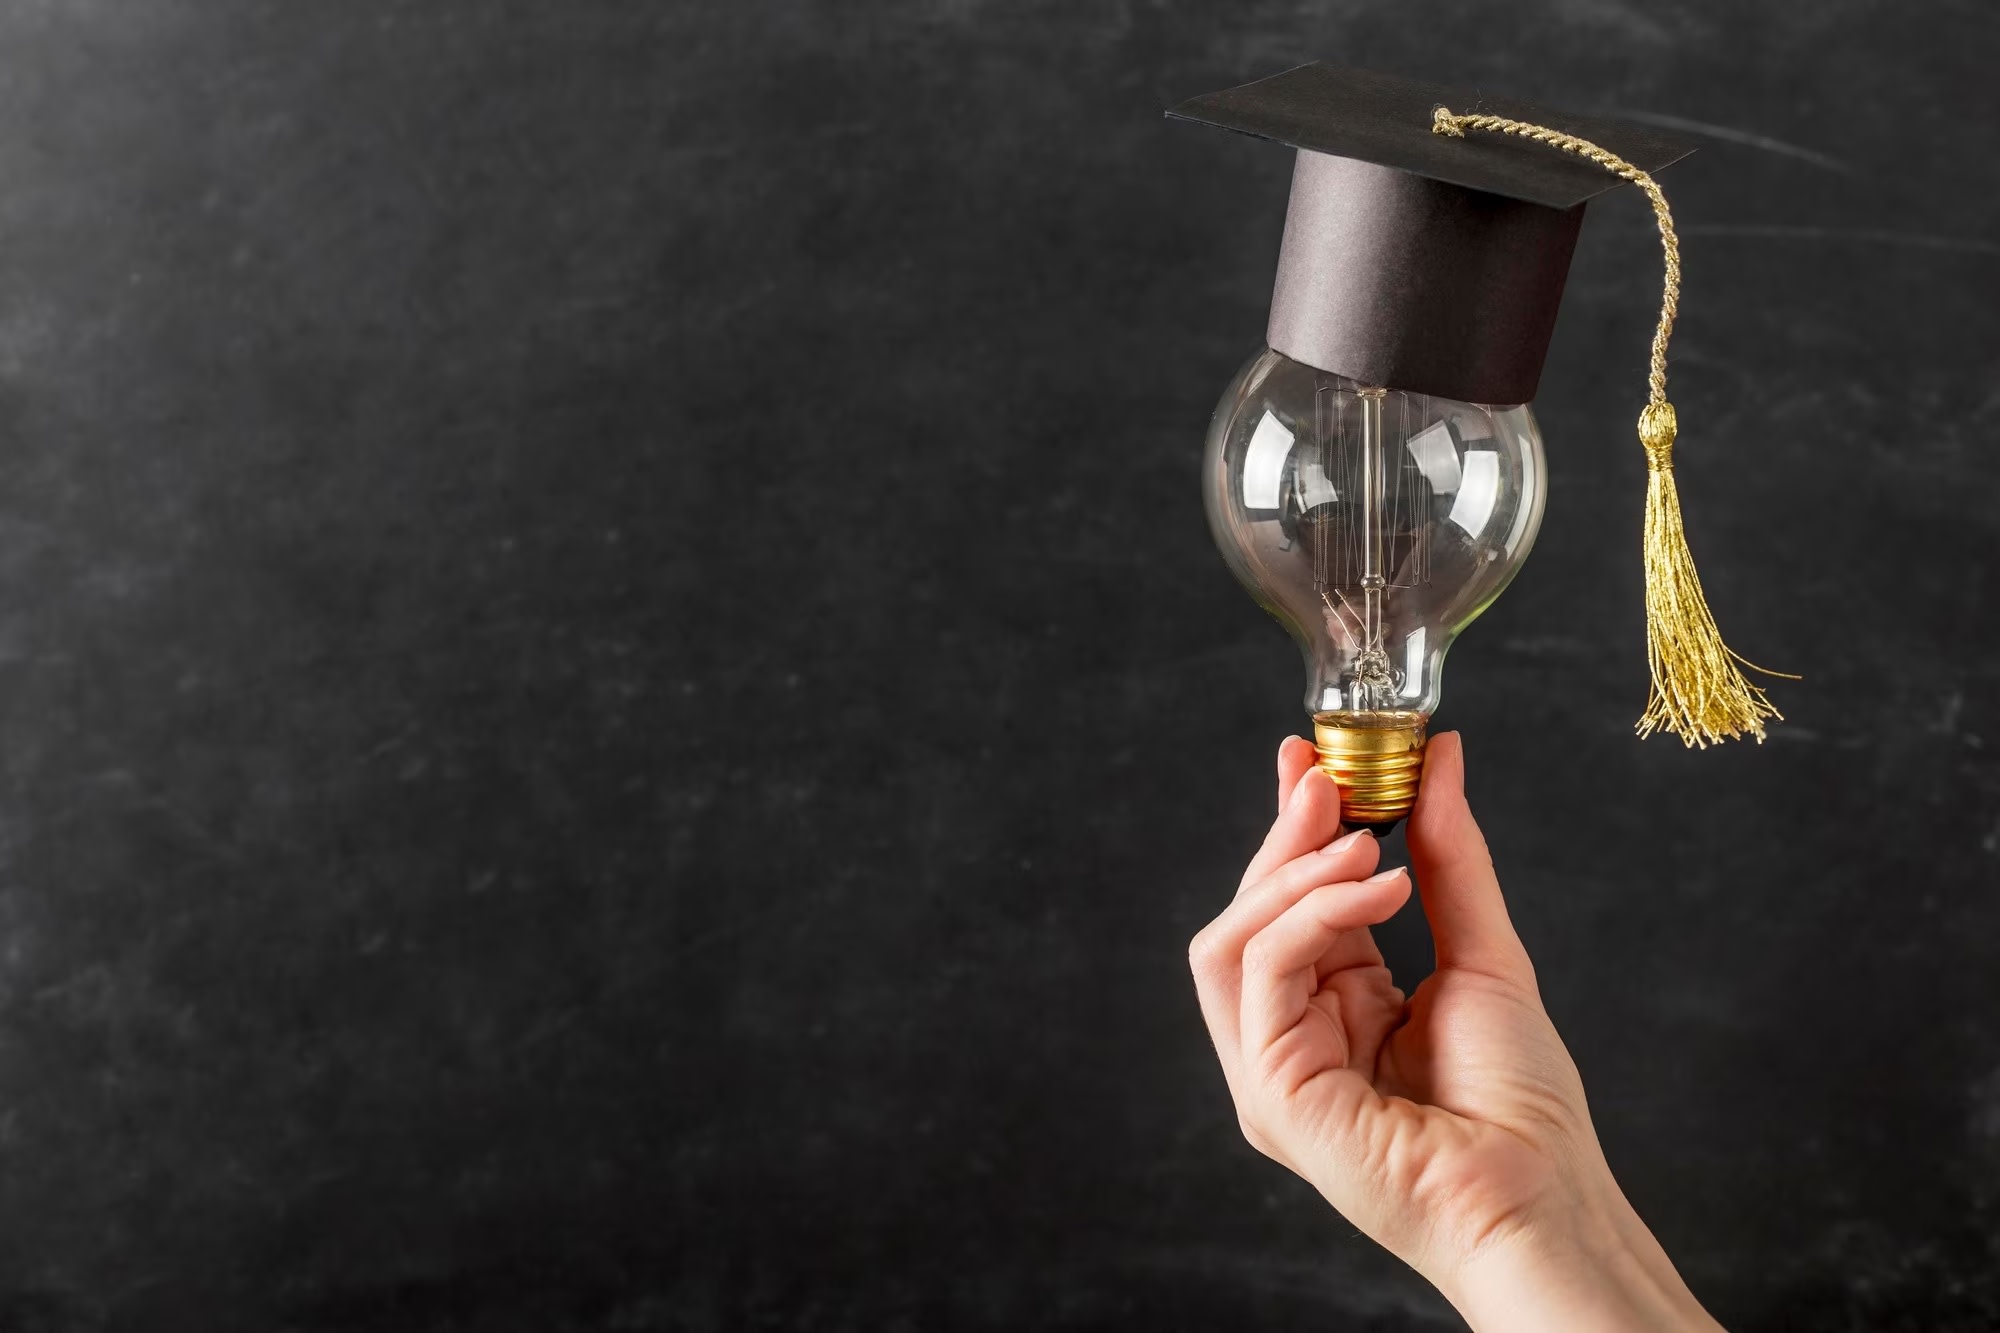 Image of hand holding light bulb with academic mortar board on top